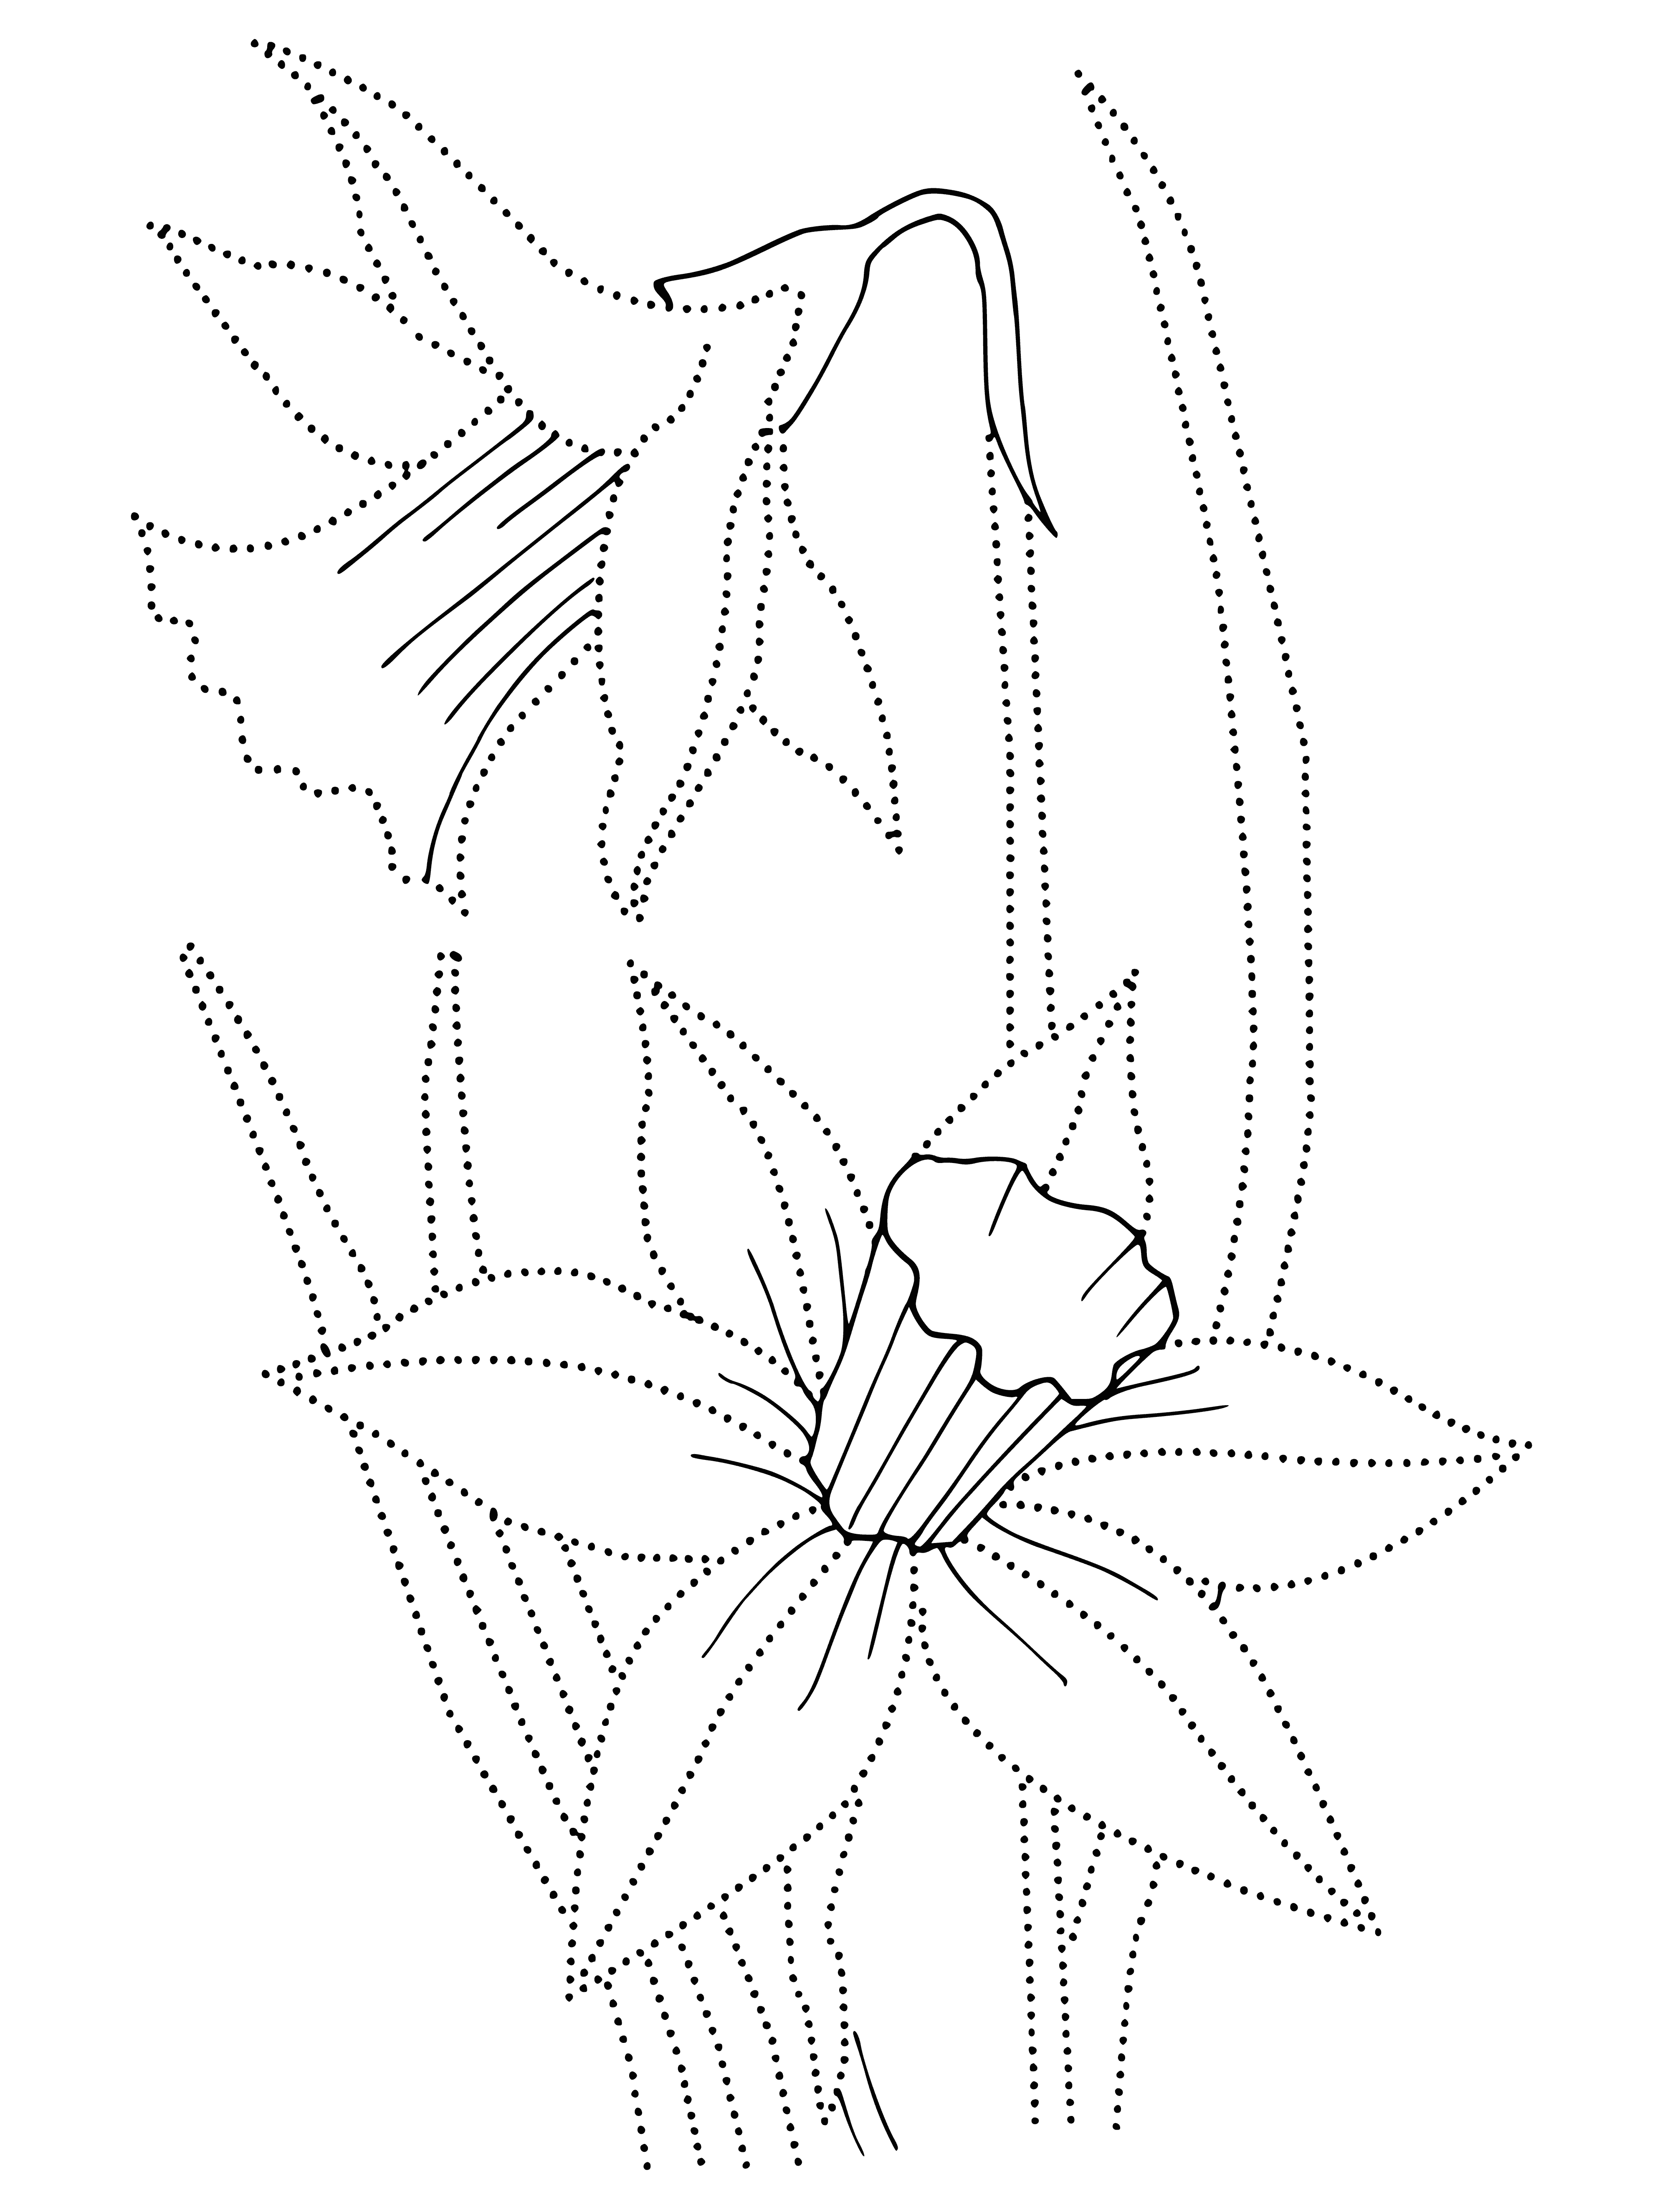 coloring page: A yellow flower with a green stem and curved petals is surrounded by small green leaves. #Flower #ColoringPage #Nature